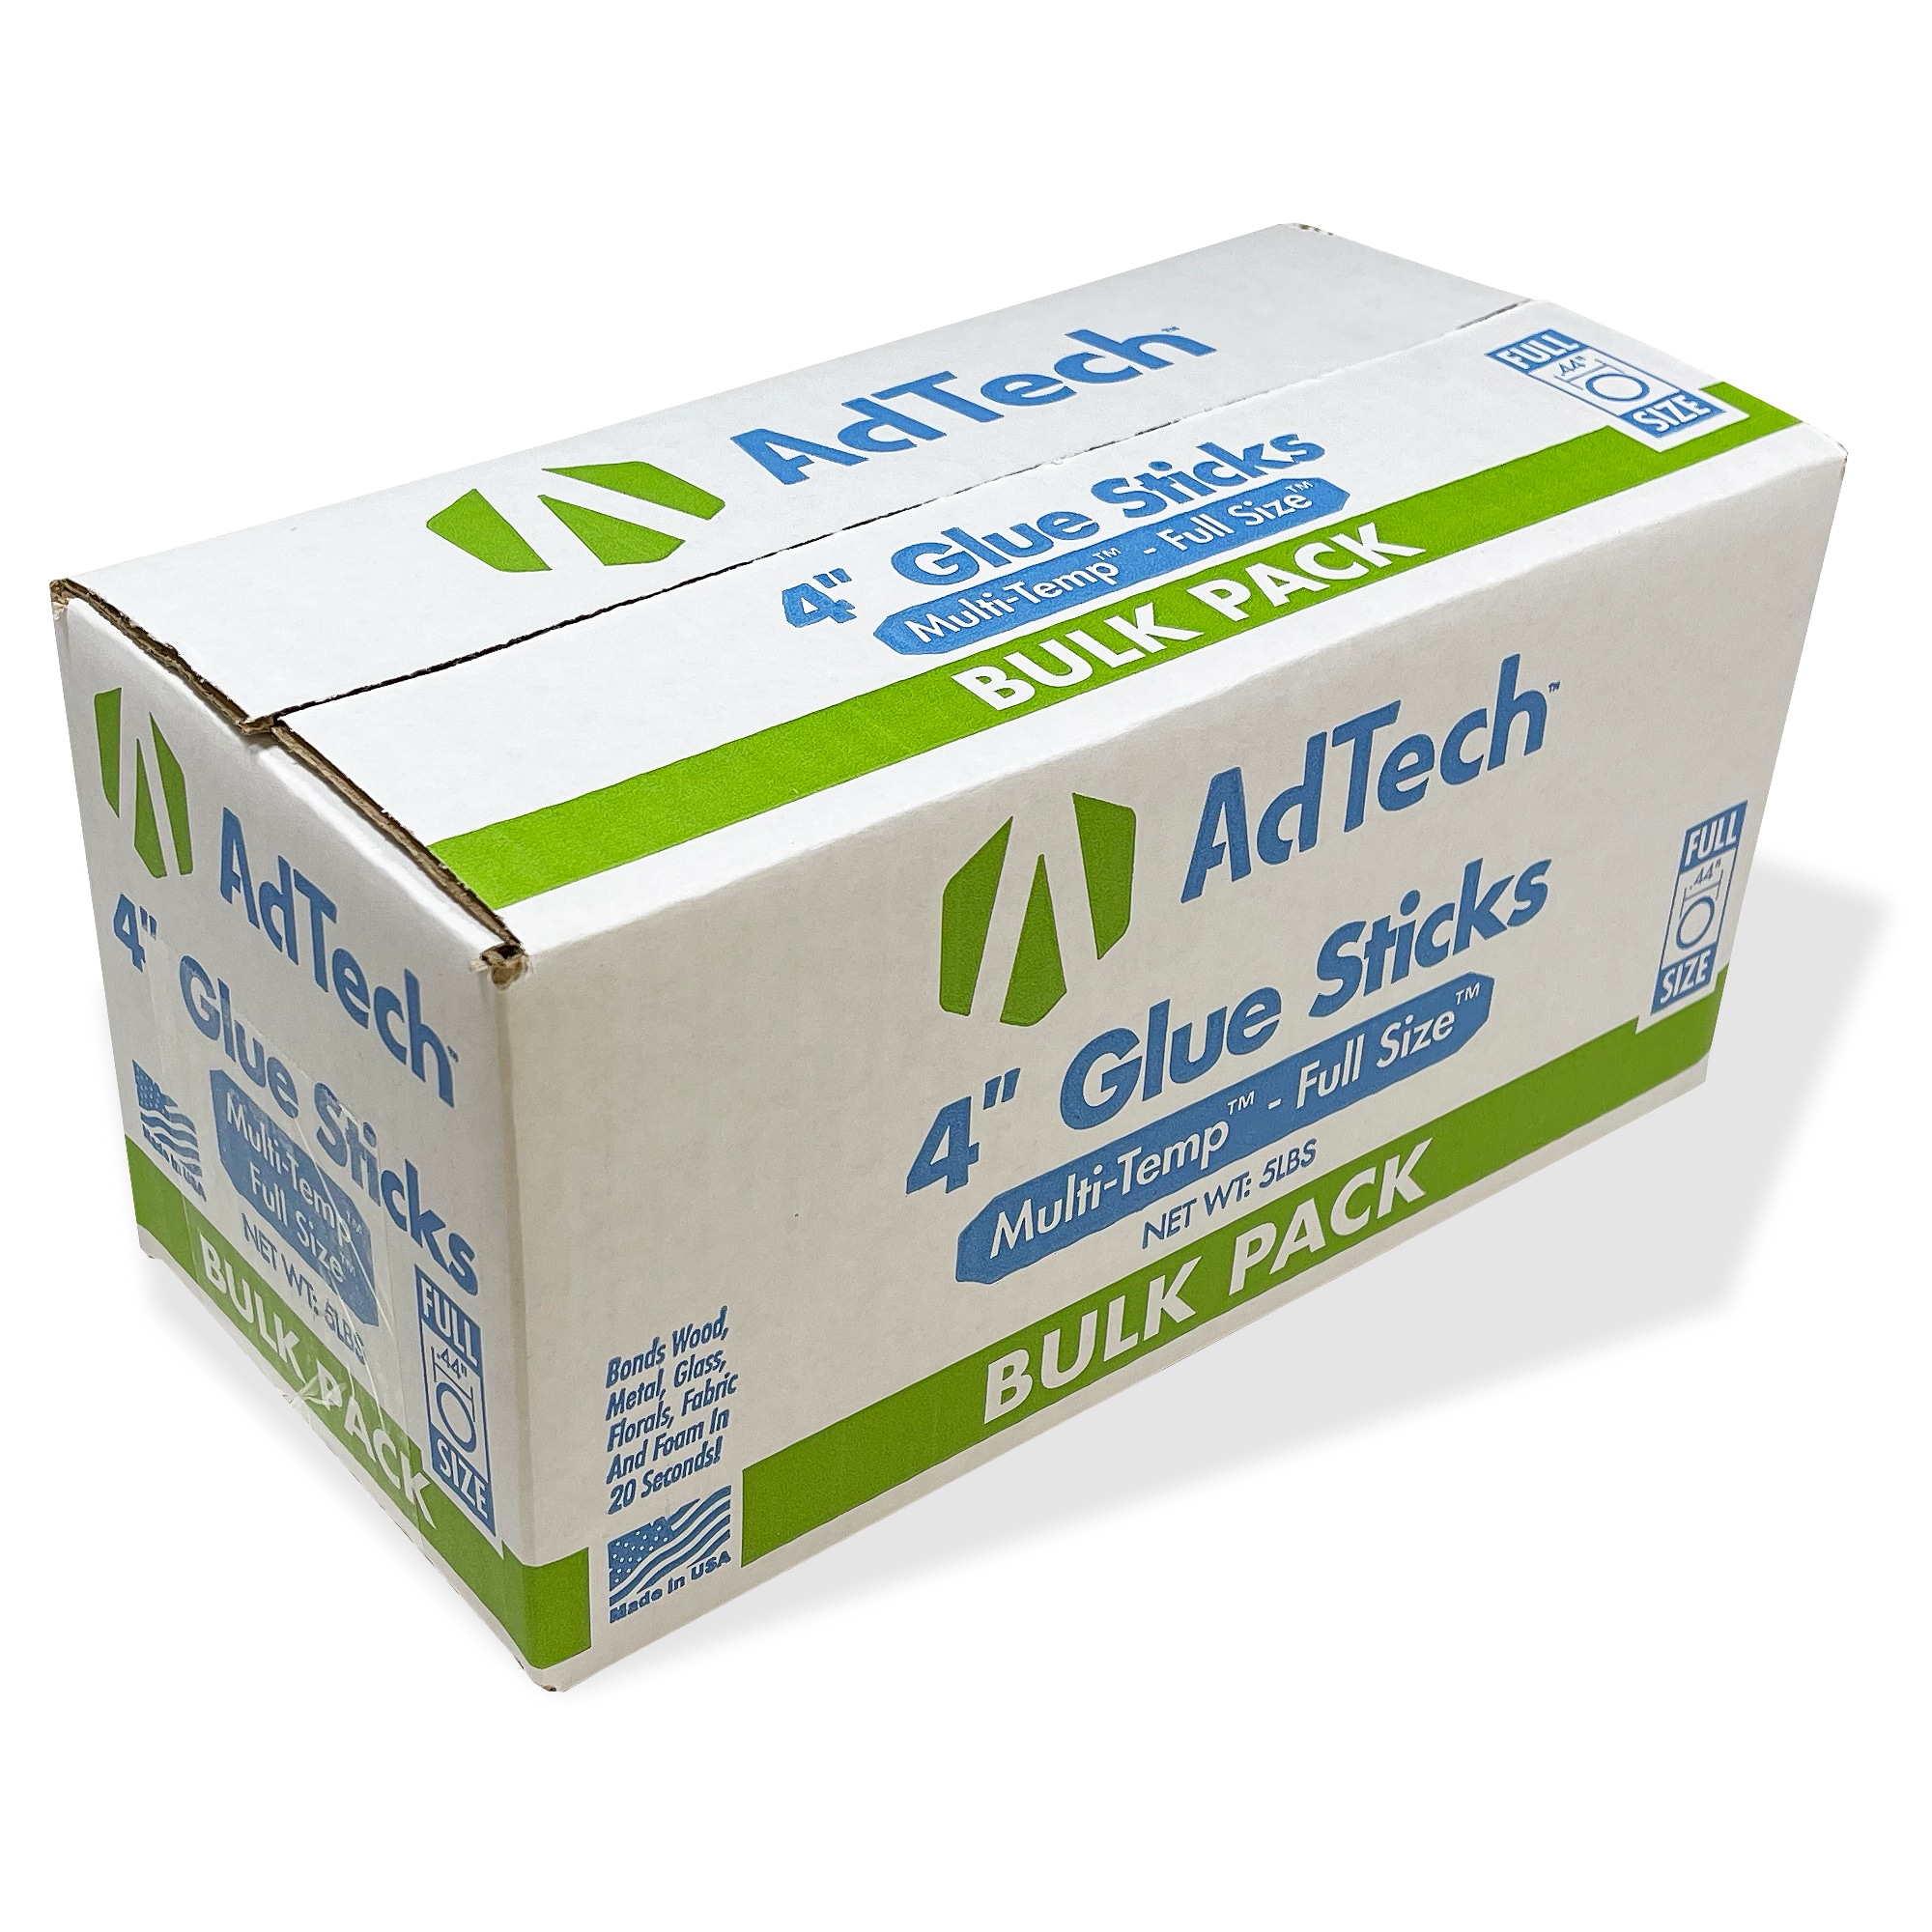 AdTech Crystal Clear Hot Glue Sticks - 10-in Full Size - 5 Pound